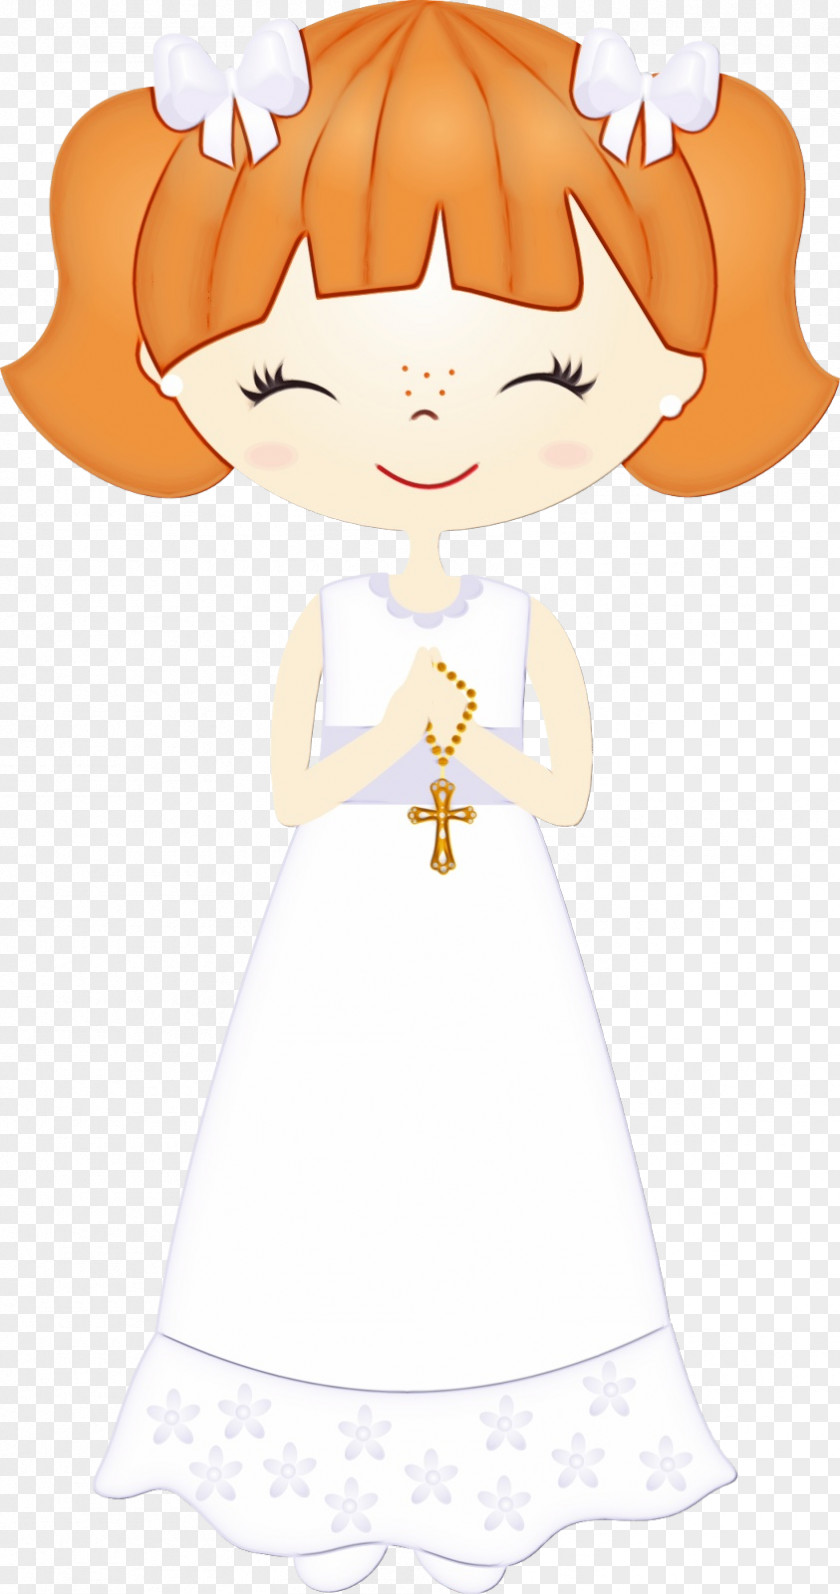 White Cartoon Angel Style PNG